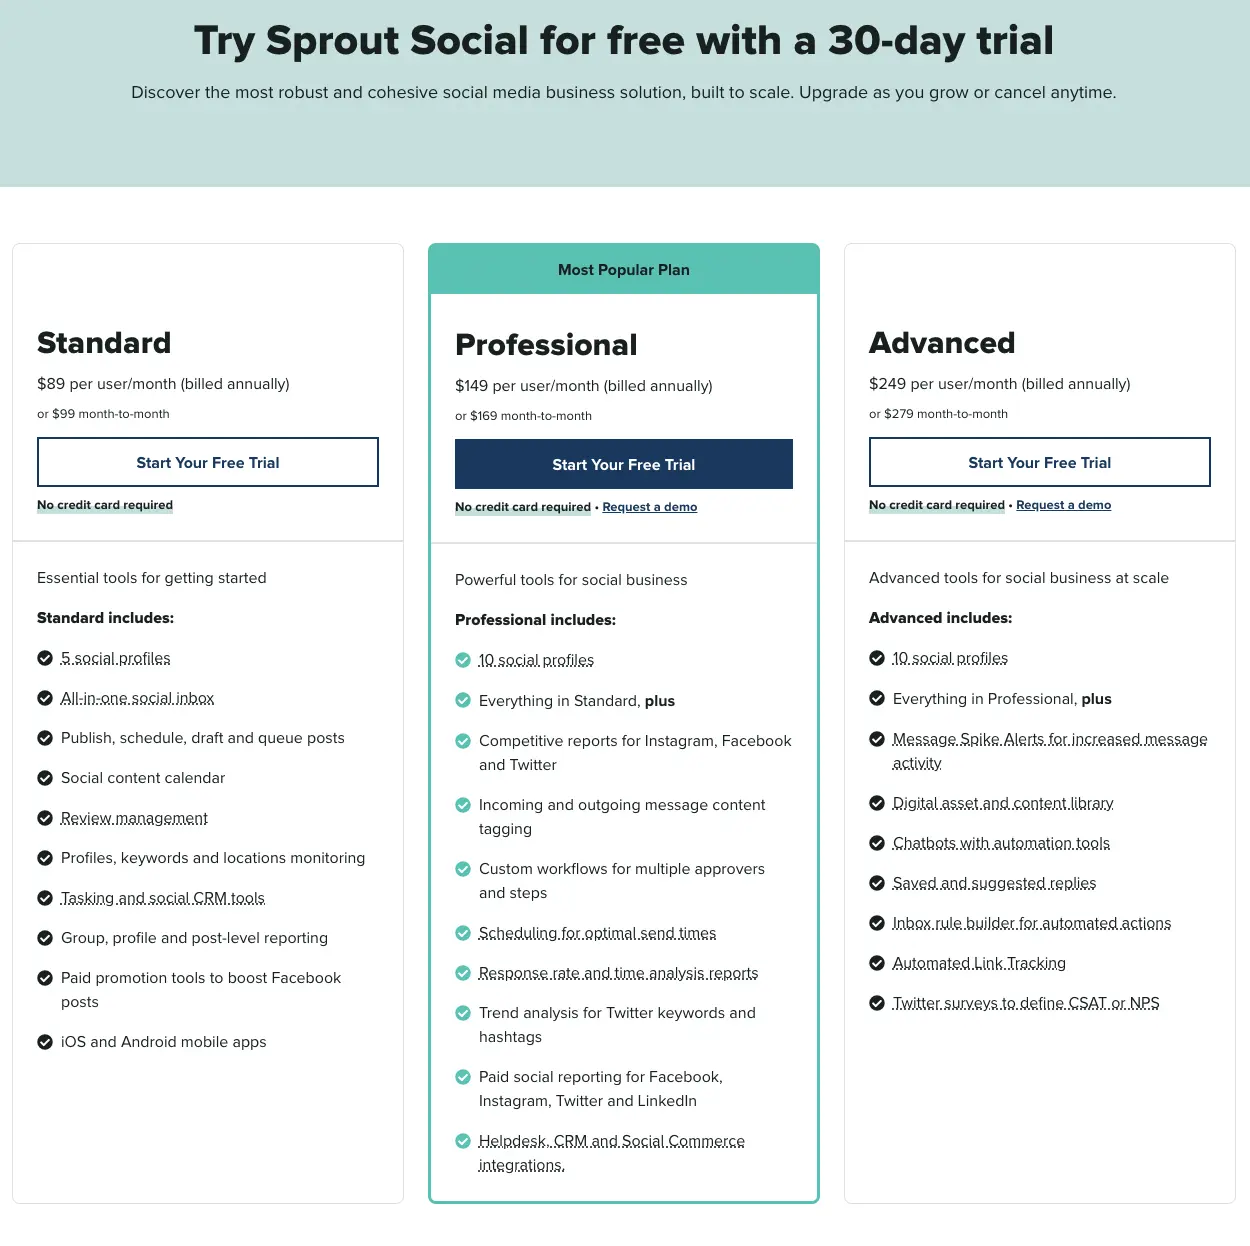 Is Sprout Social Free?